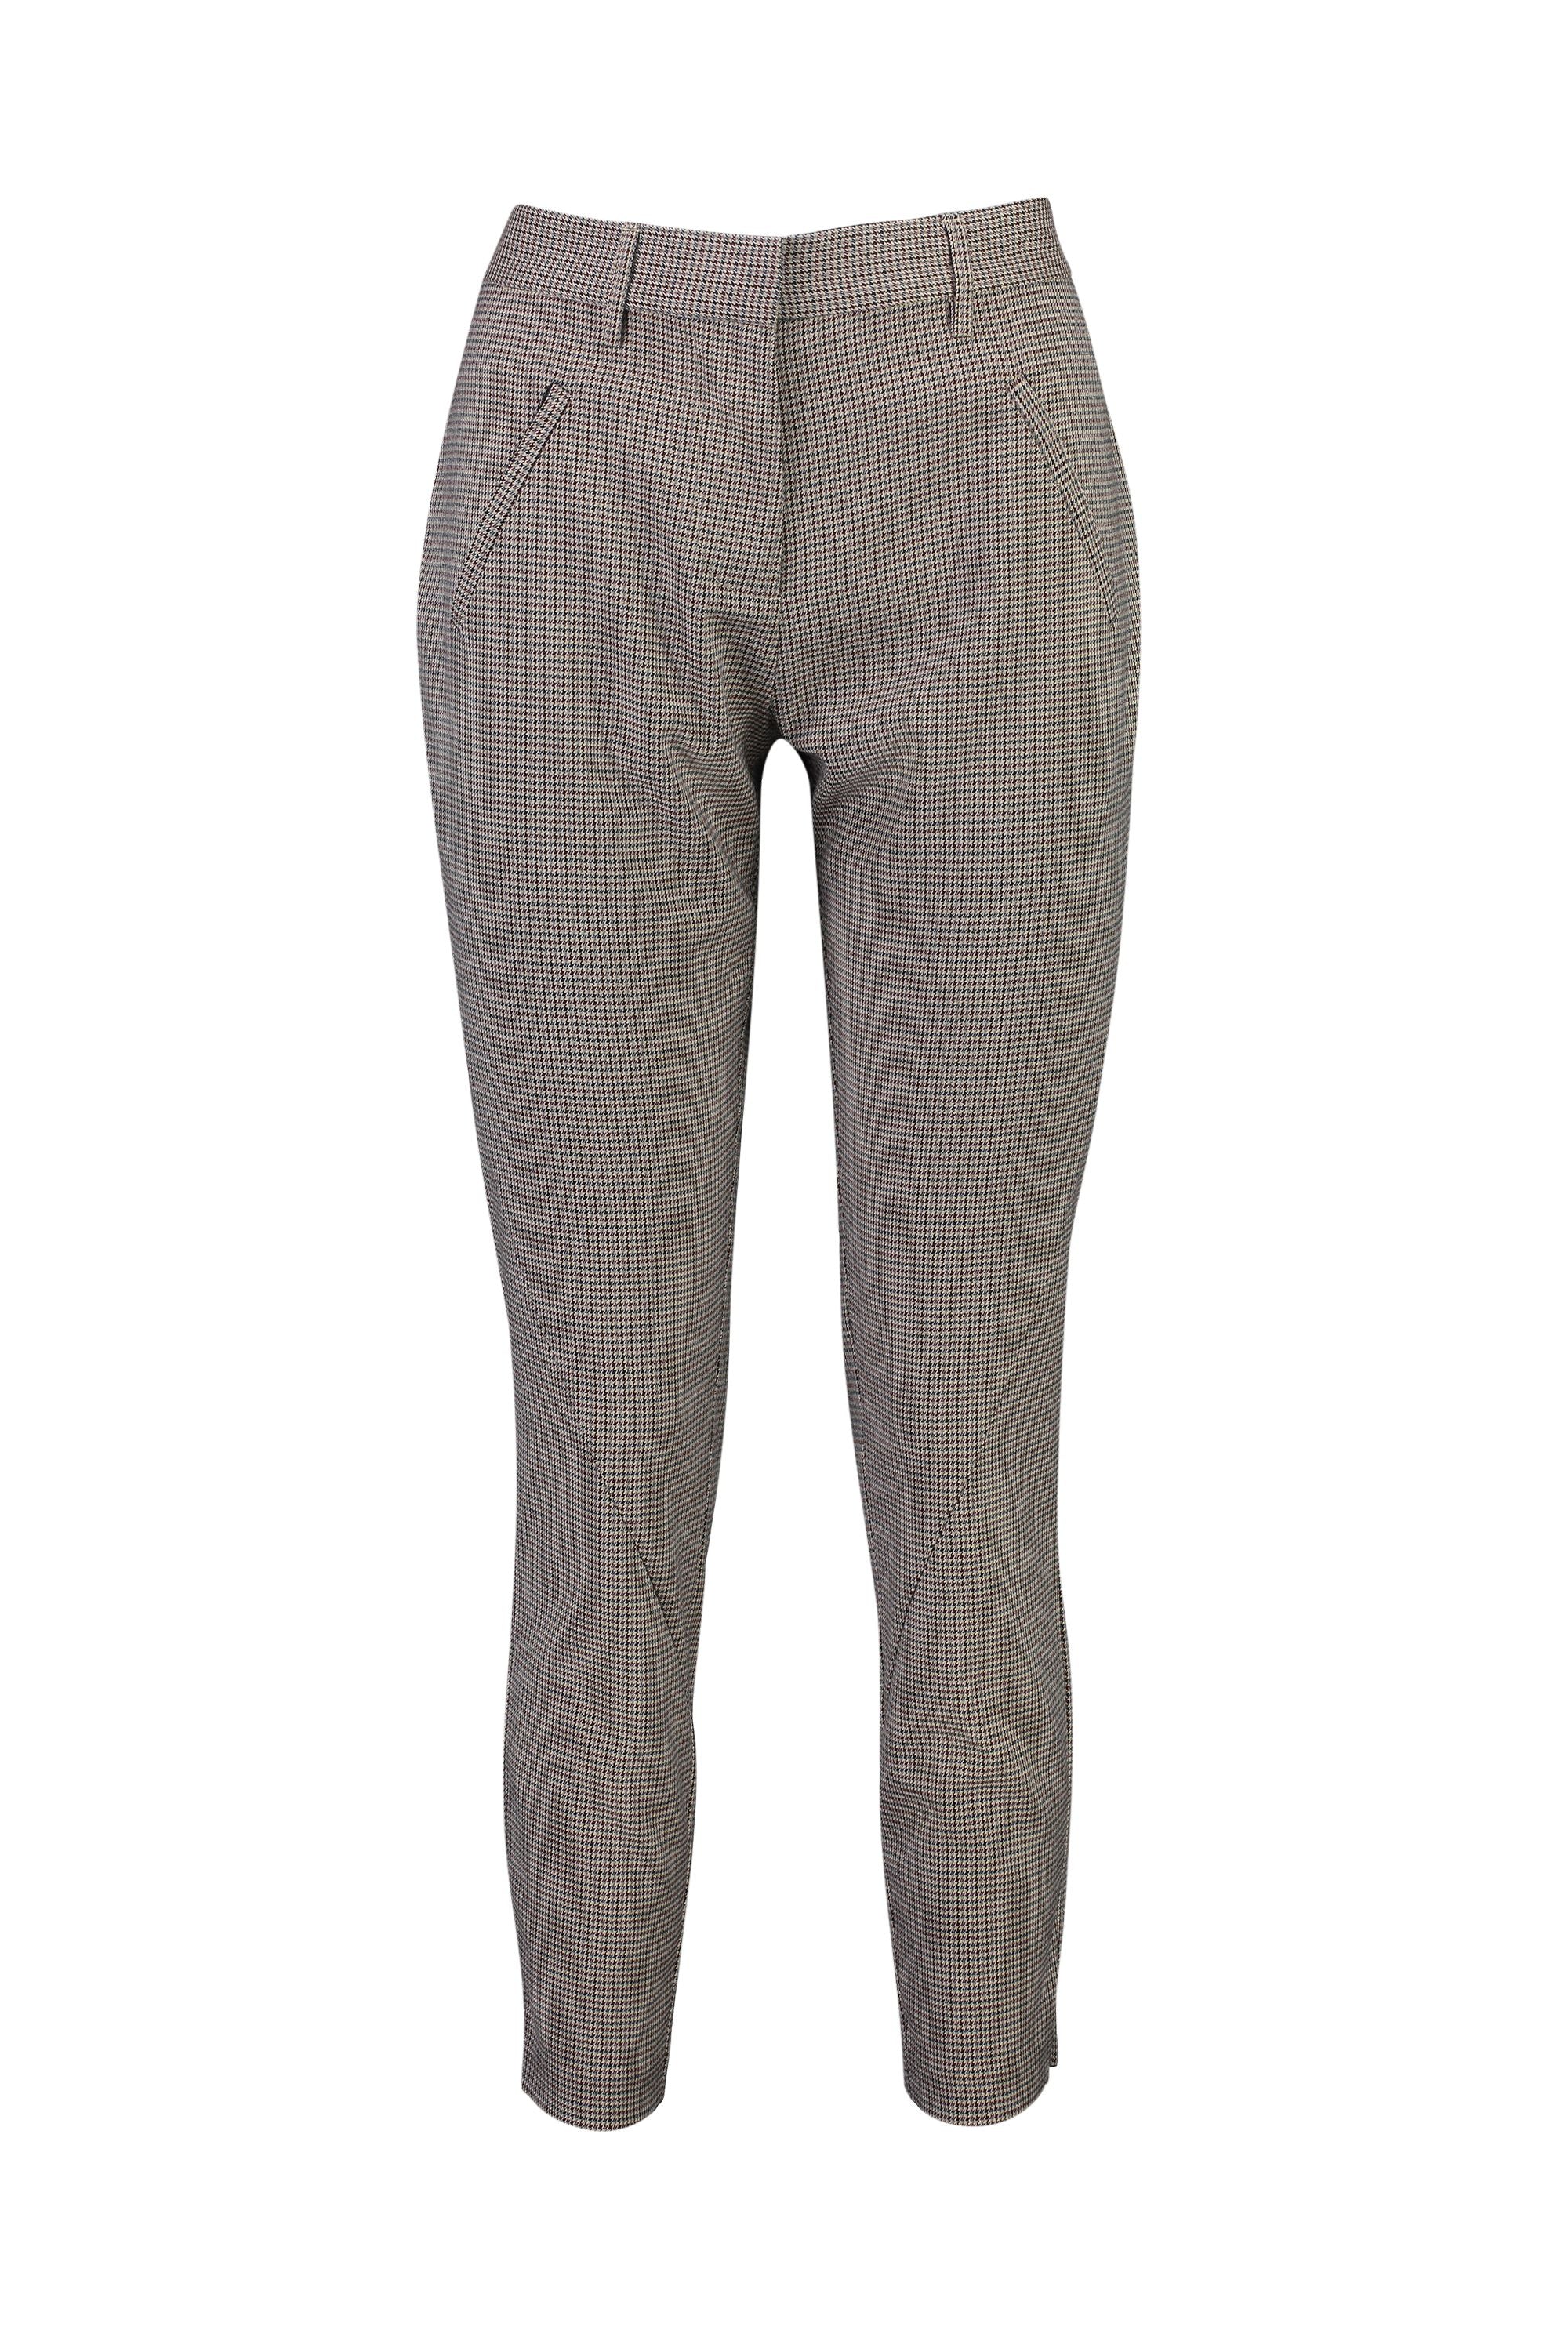 Loobies Story Hunter Pant - Houndstooth